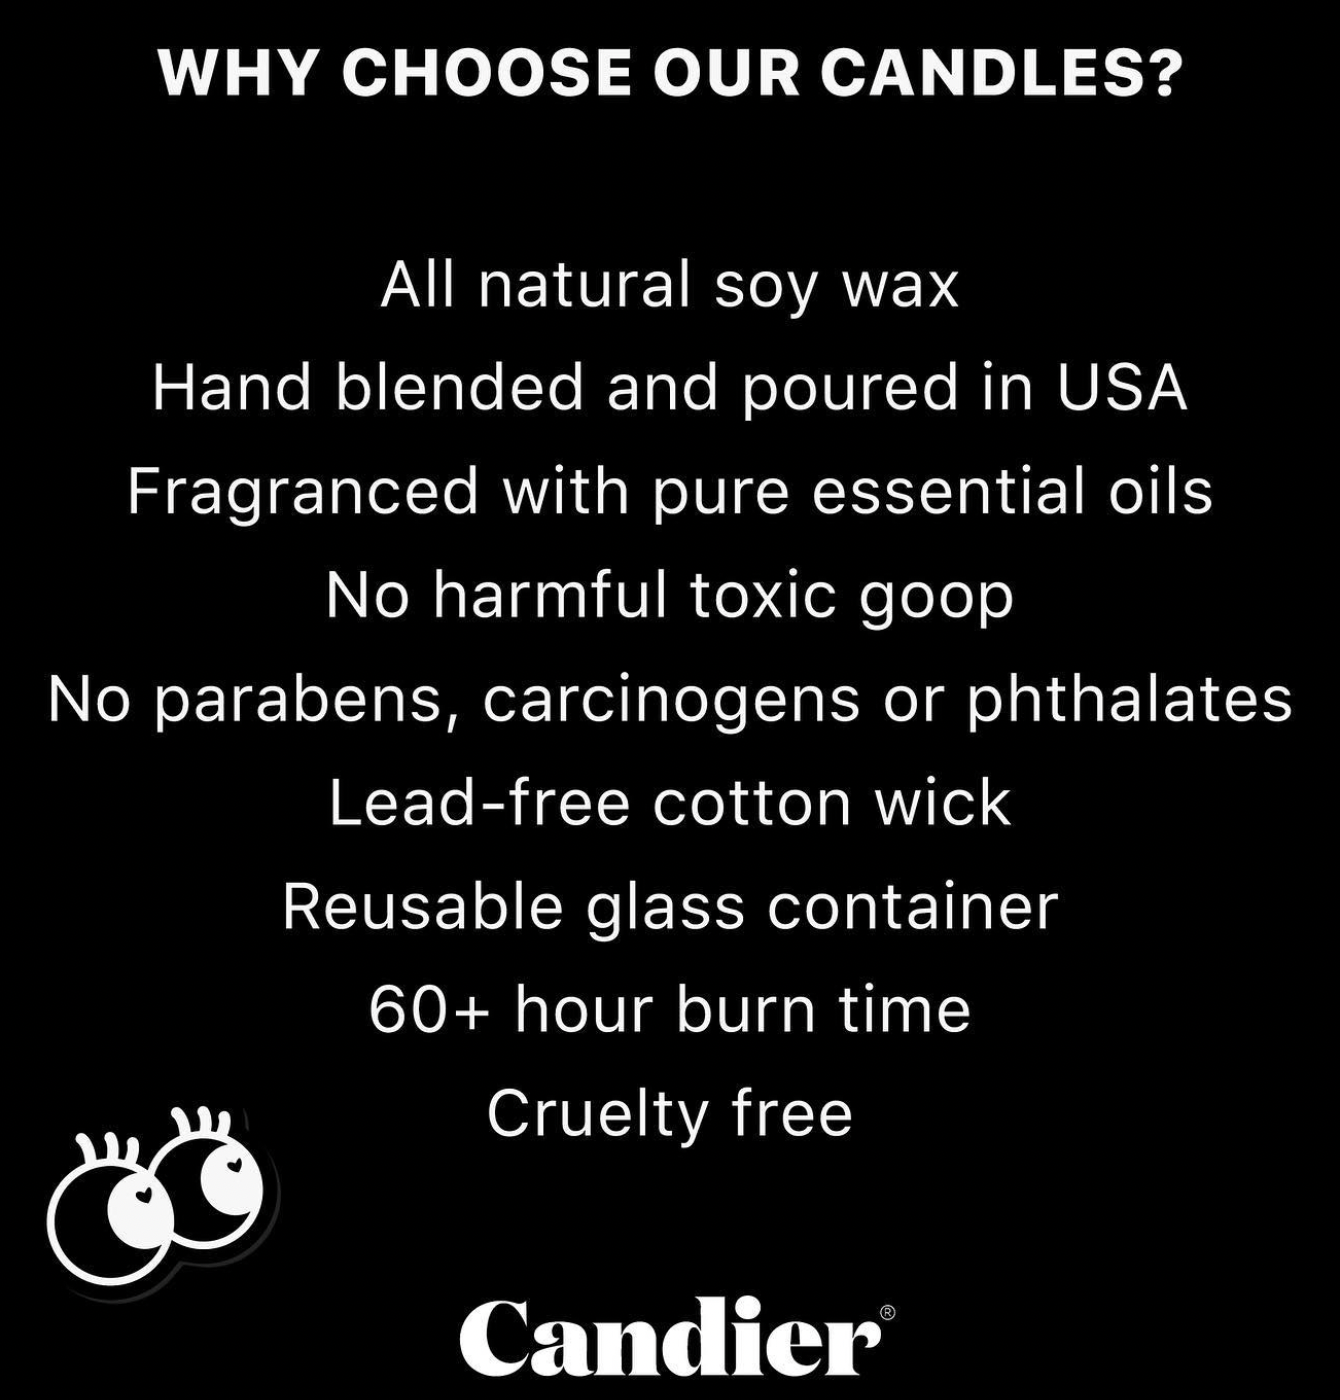 Candier "GIRL, YOU NEED TO CALM THE F DOWN" 100% Soy Pink candle